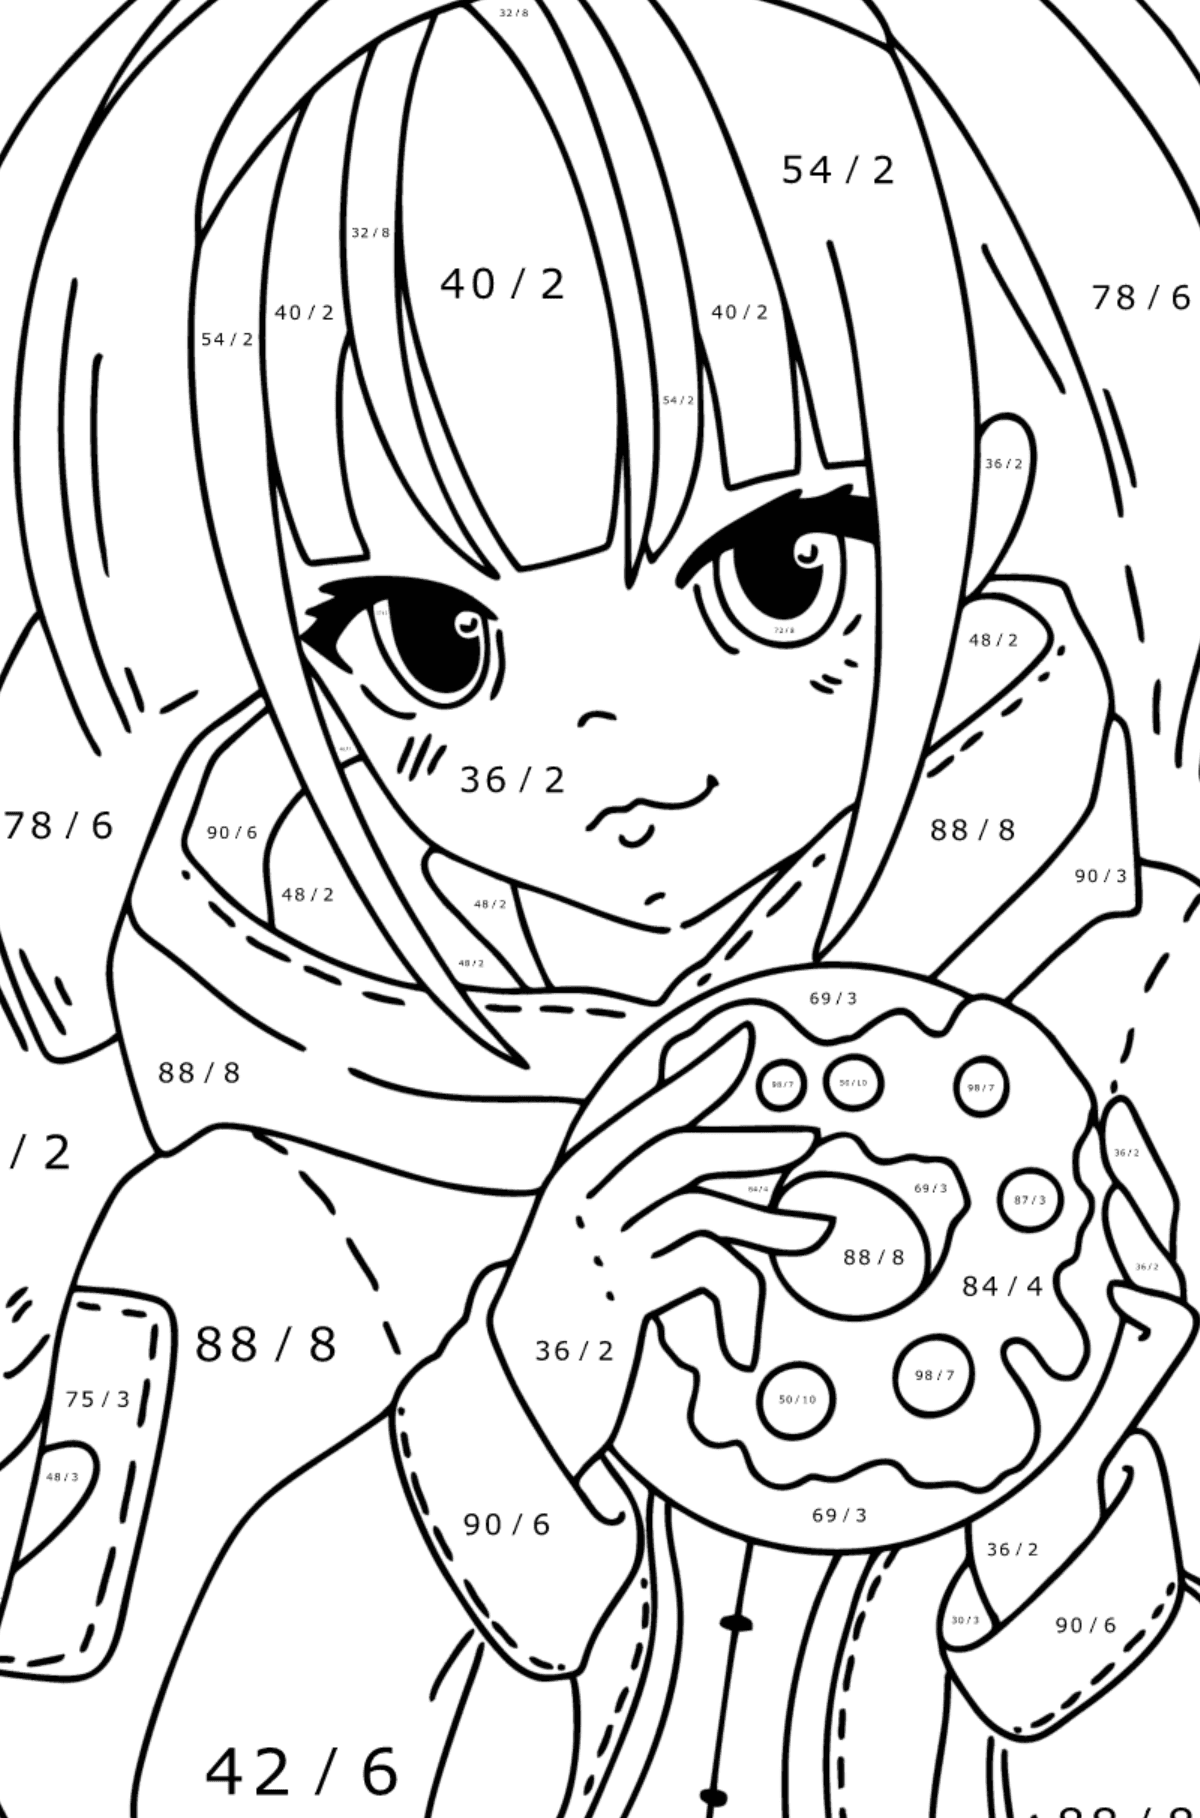 Japanese anime girl coloring page - Math Coloring - Division for Kids